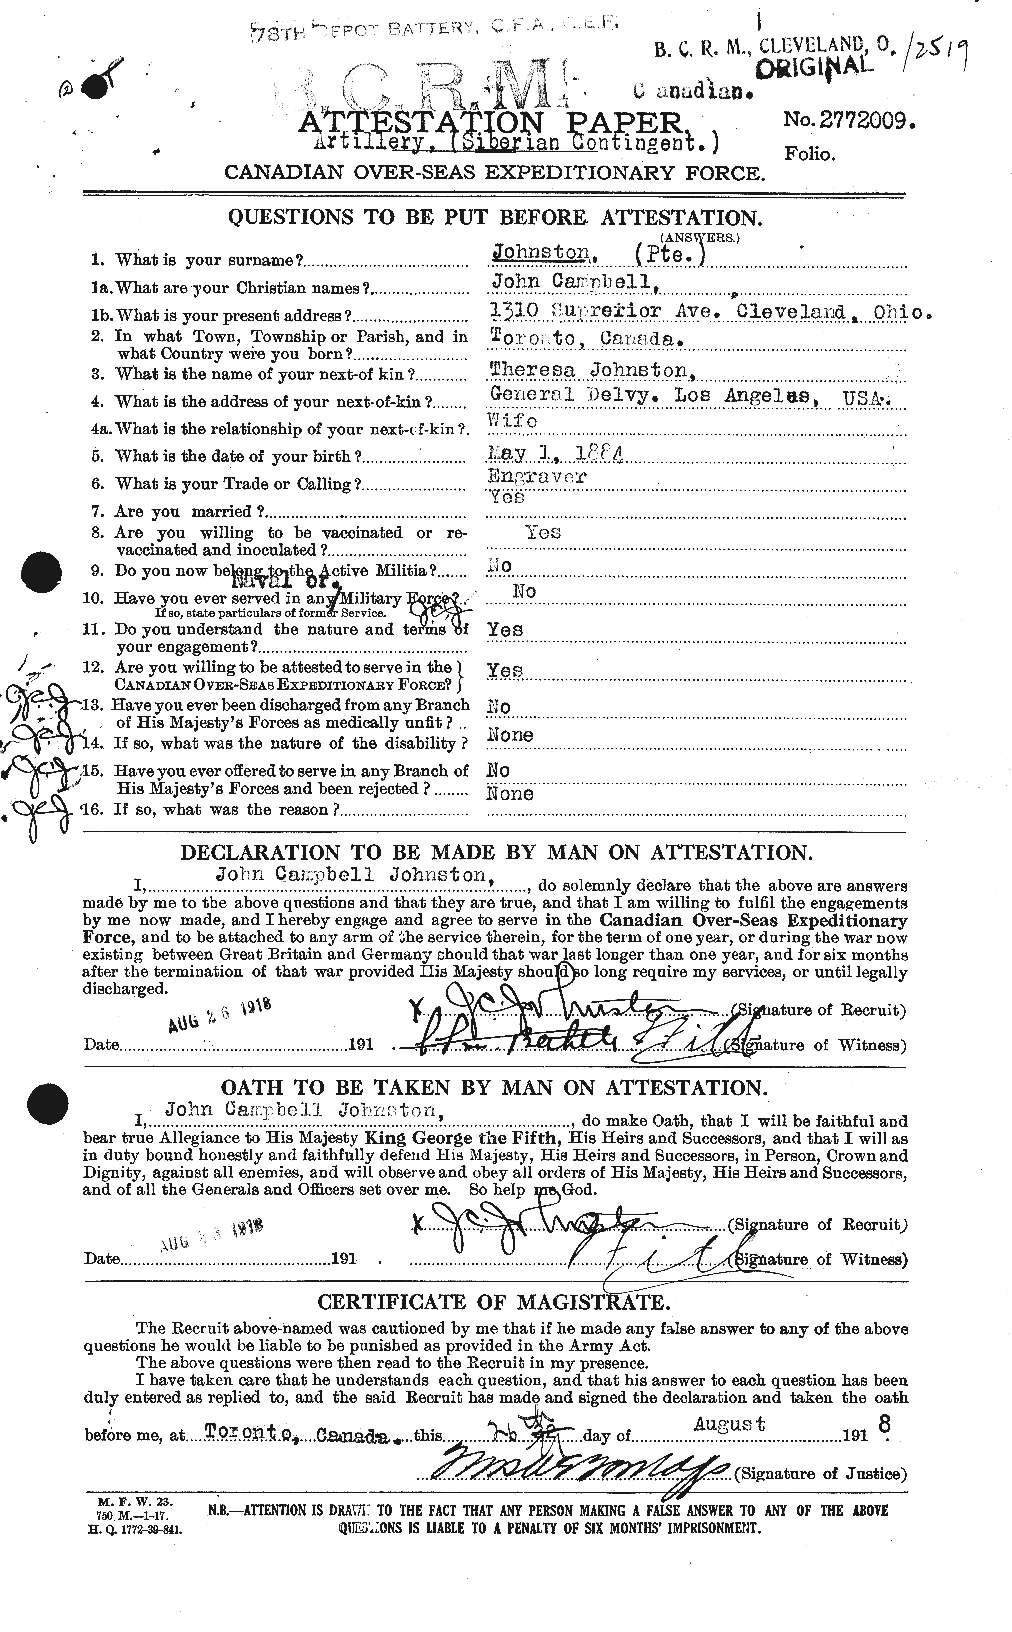 Personnel Records of the First World War - CEF 422820a